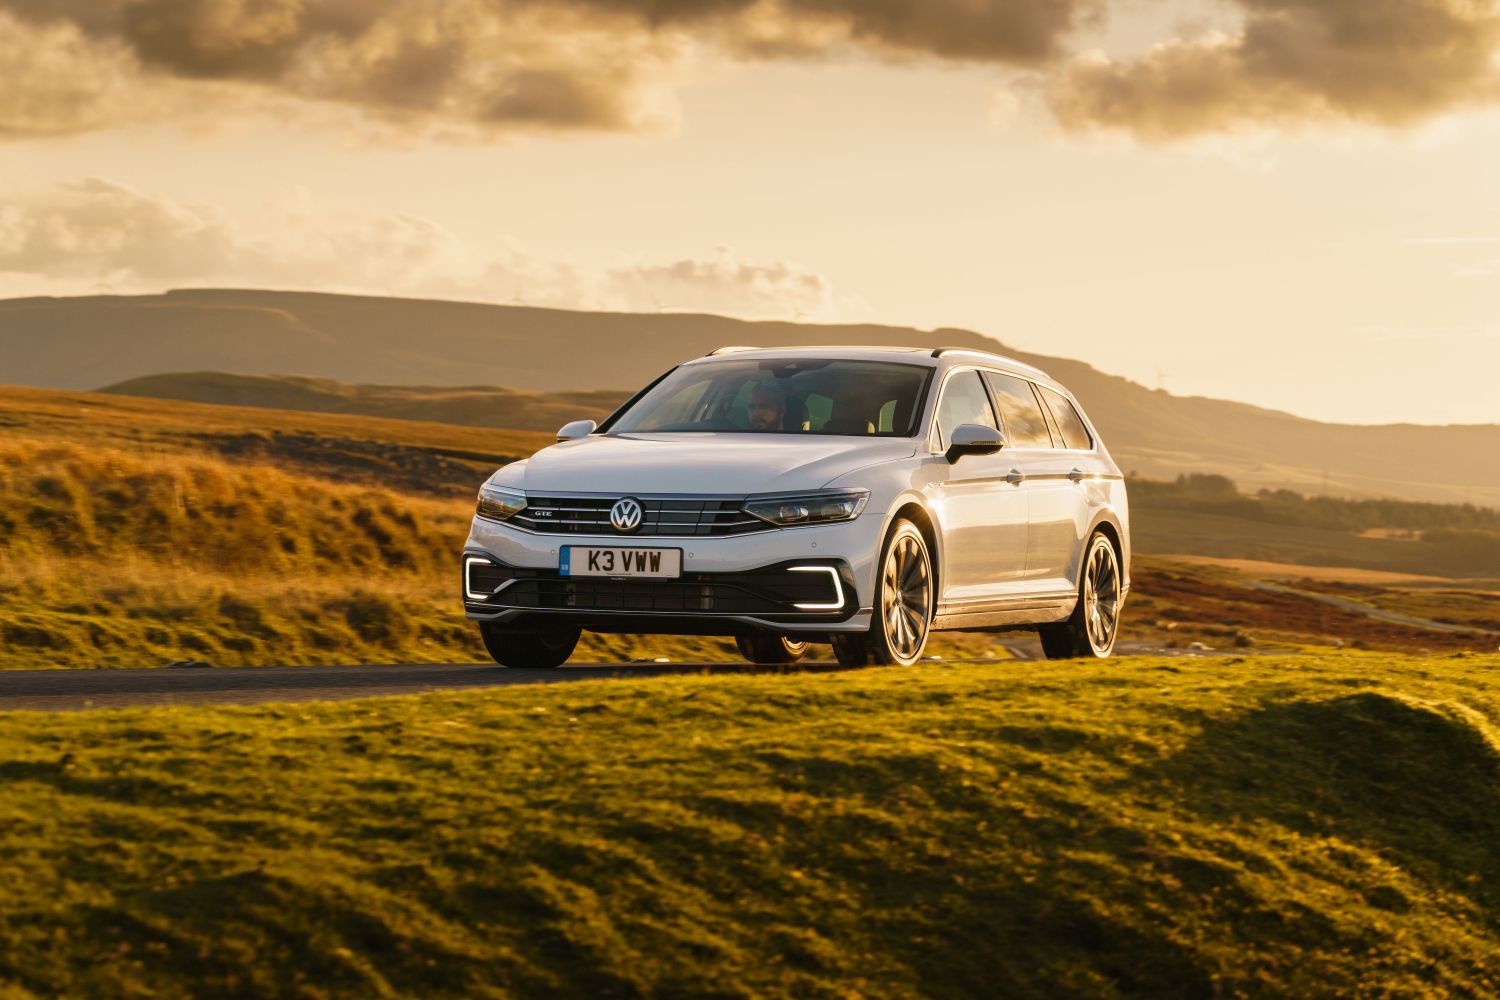 Volkswagen Passat GTE station wagon on country road during sunset